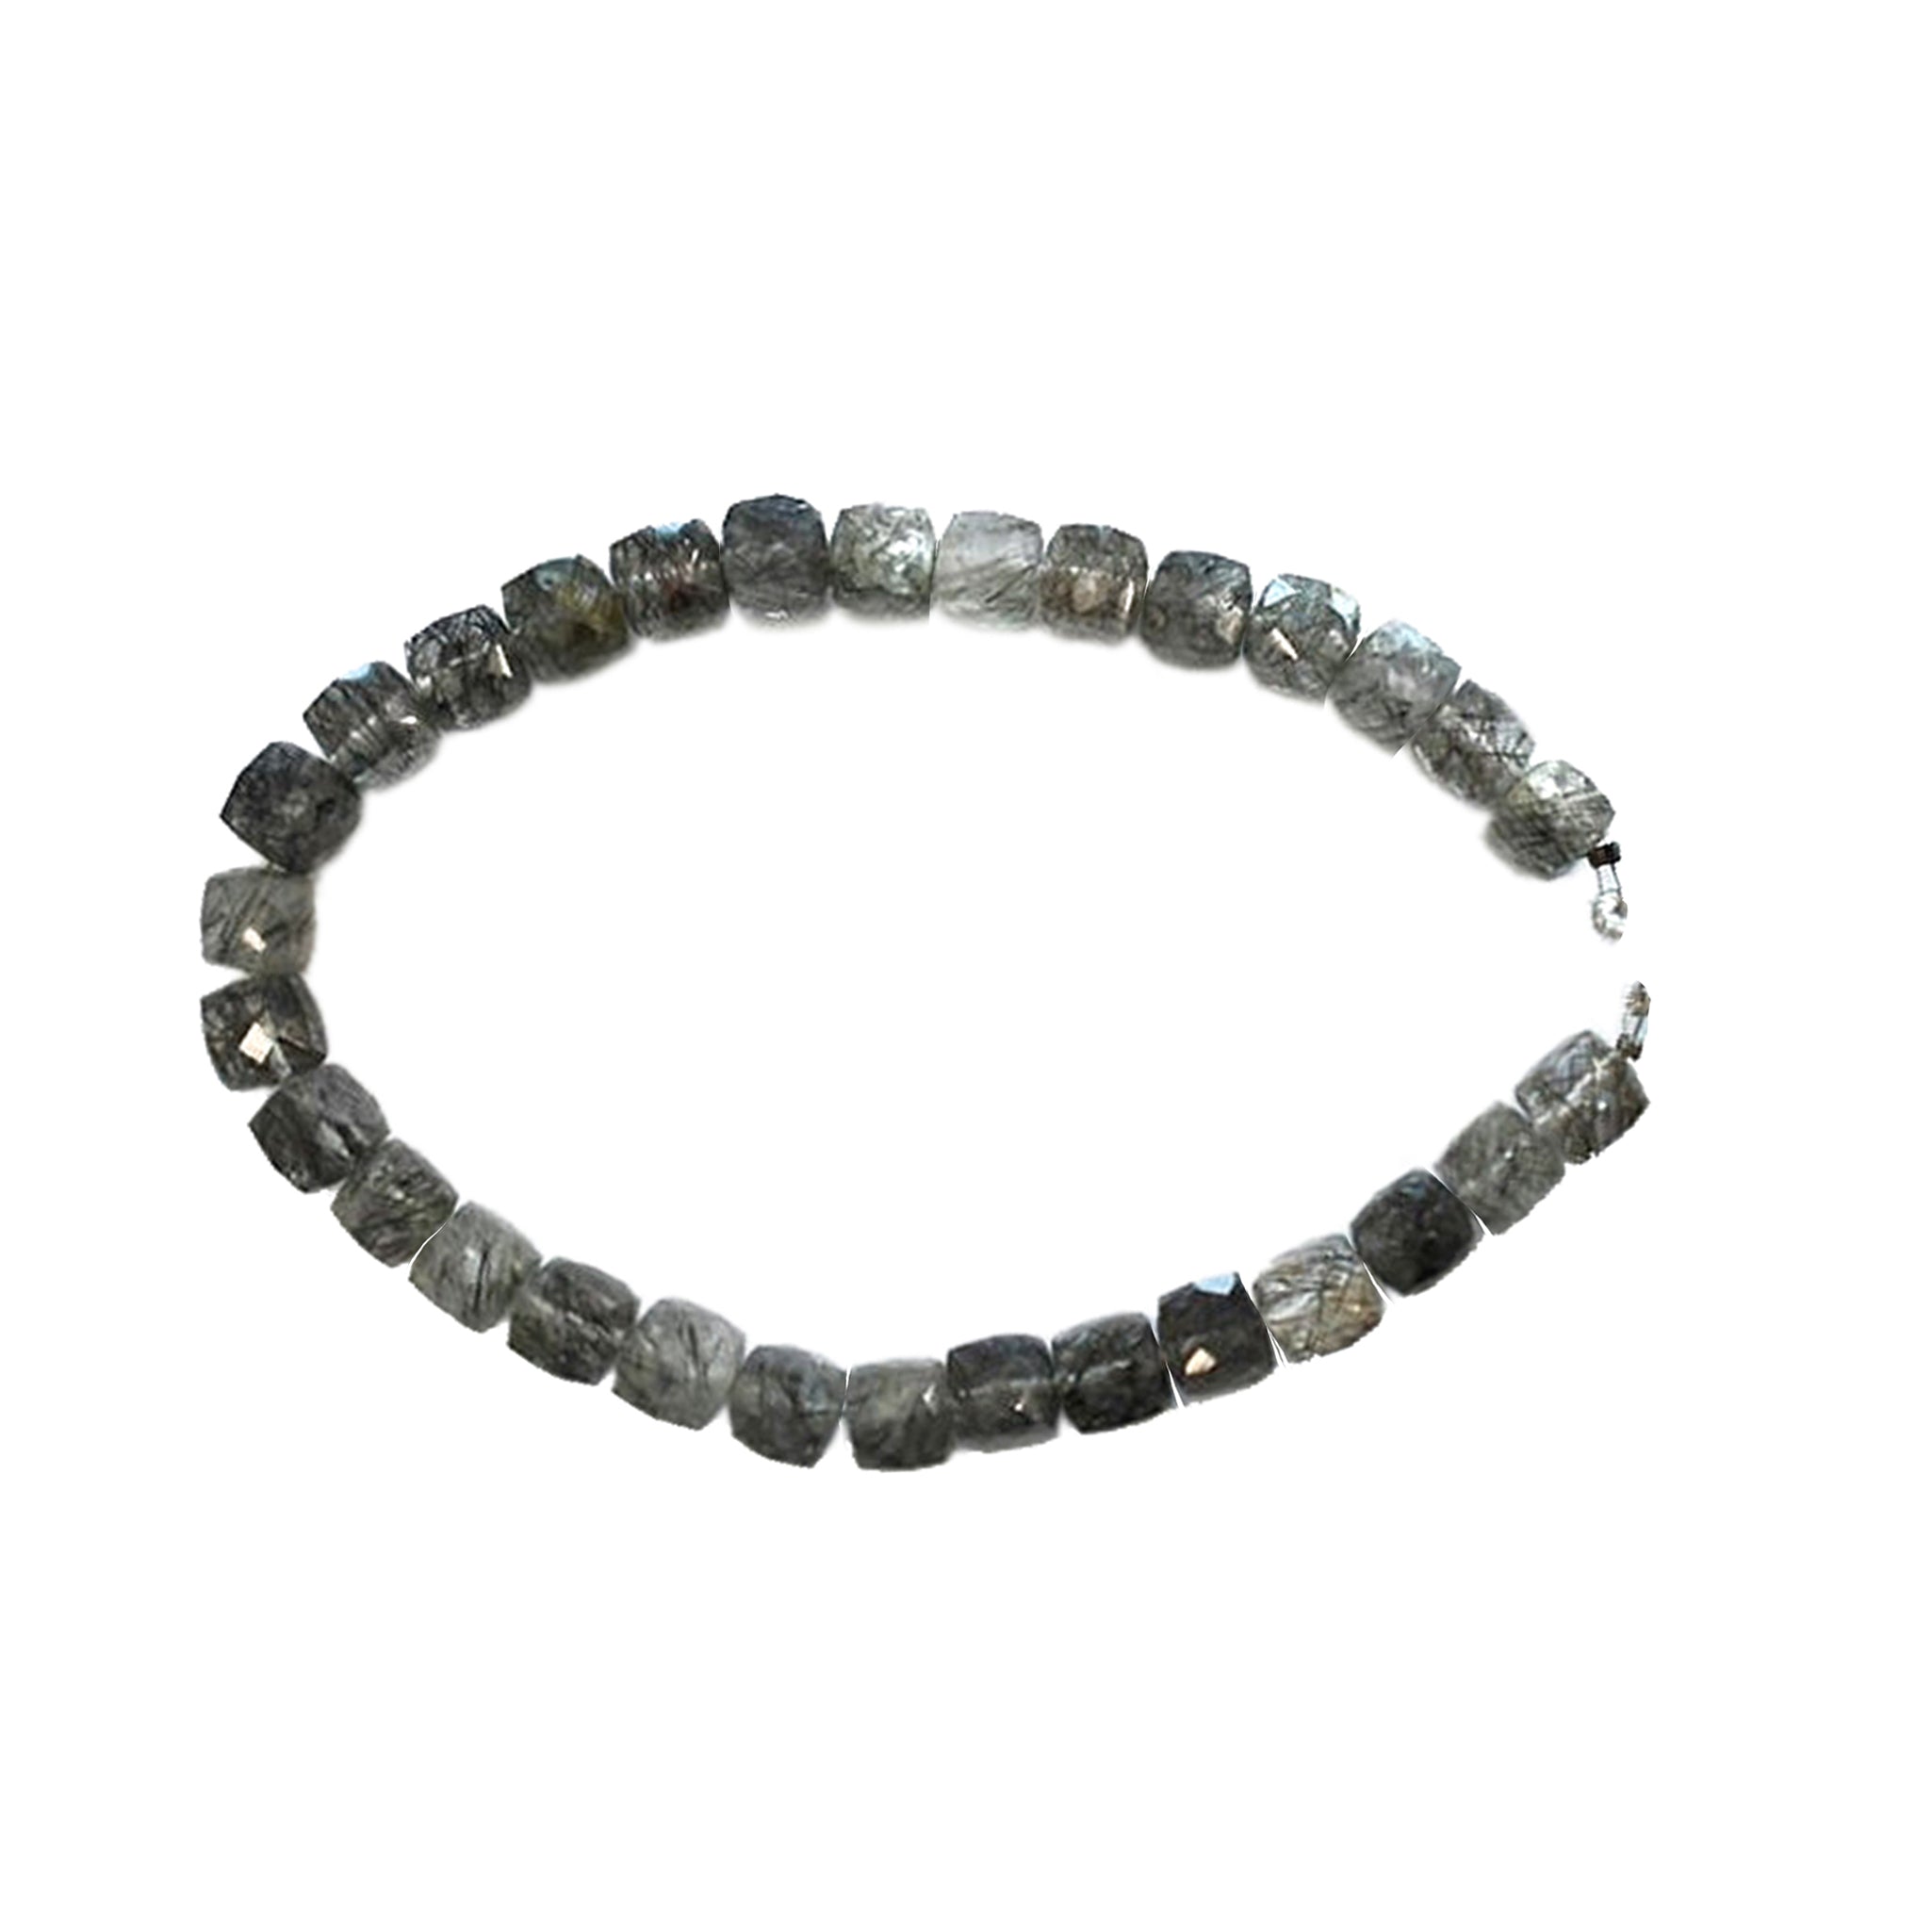 Black Rutilated Quartz 7 To 8 MM Faceted Cube Shape Beads Strand